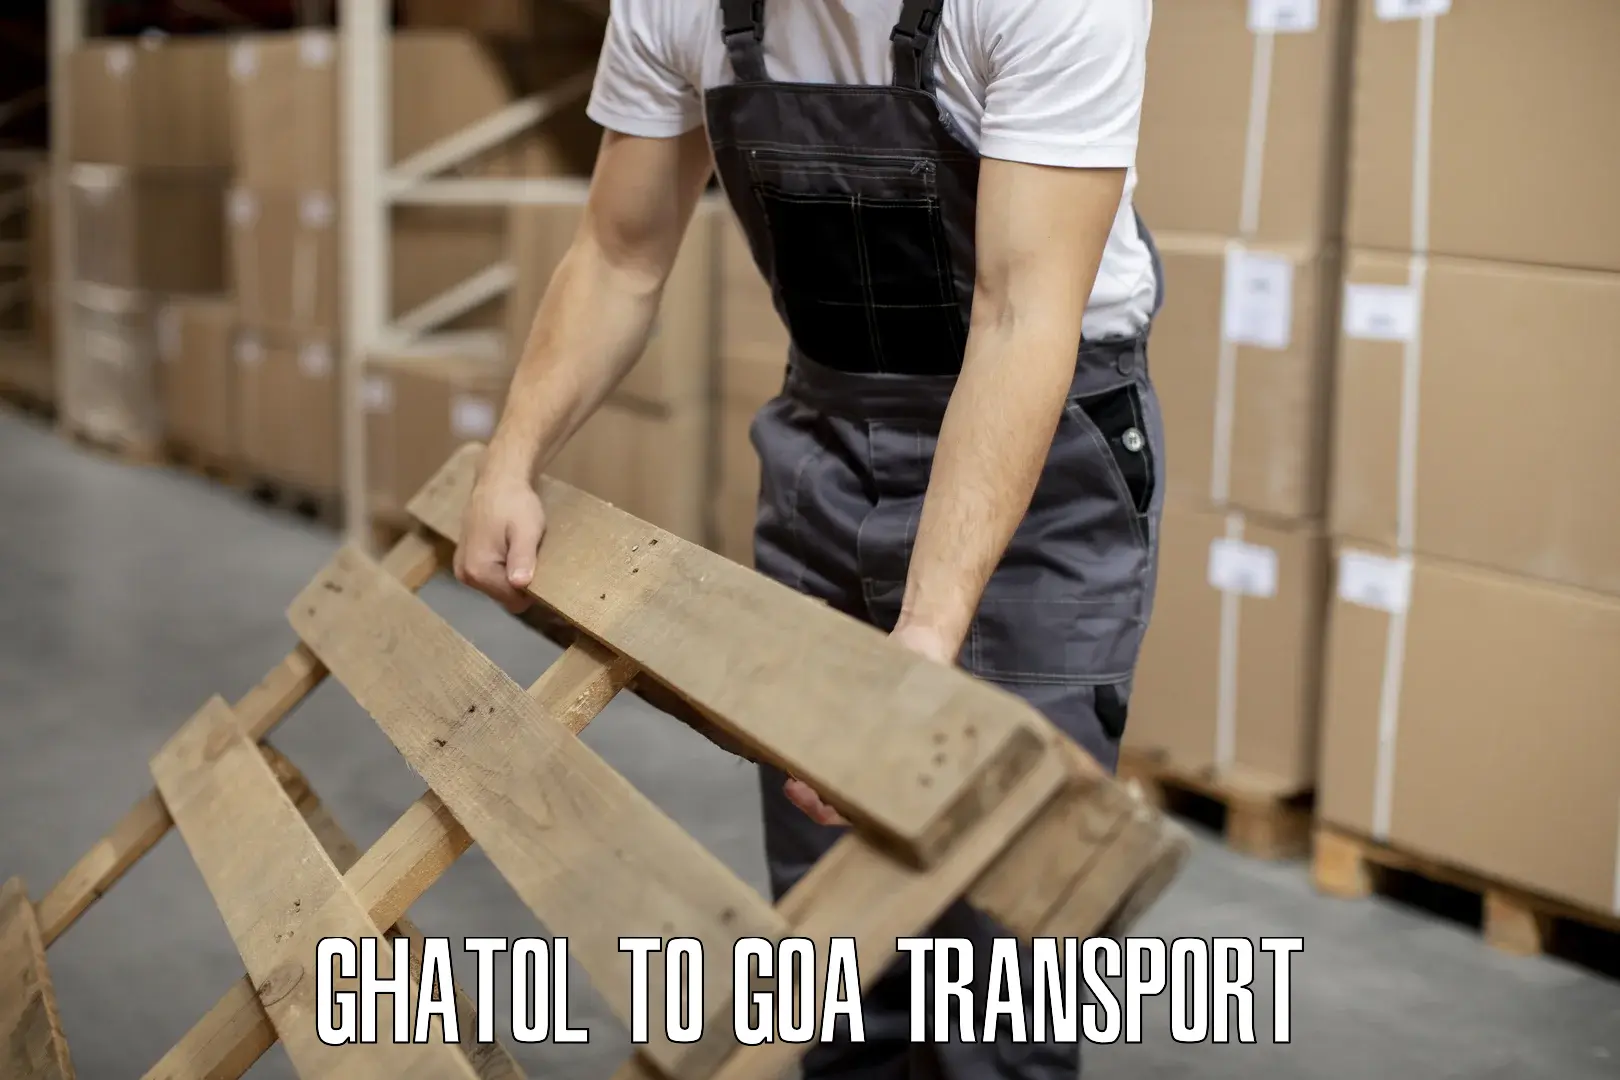 Two wheeler transport services Ghatol to South Goa